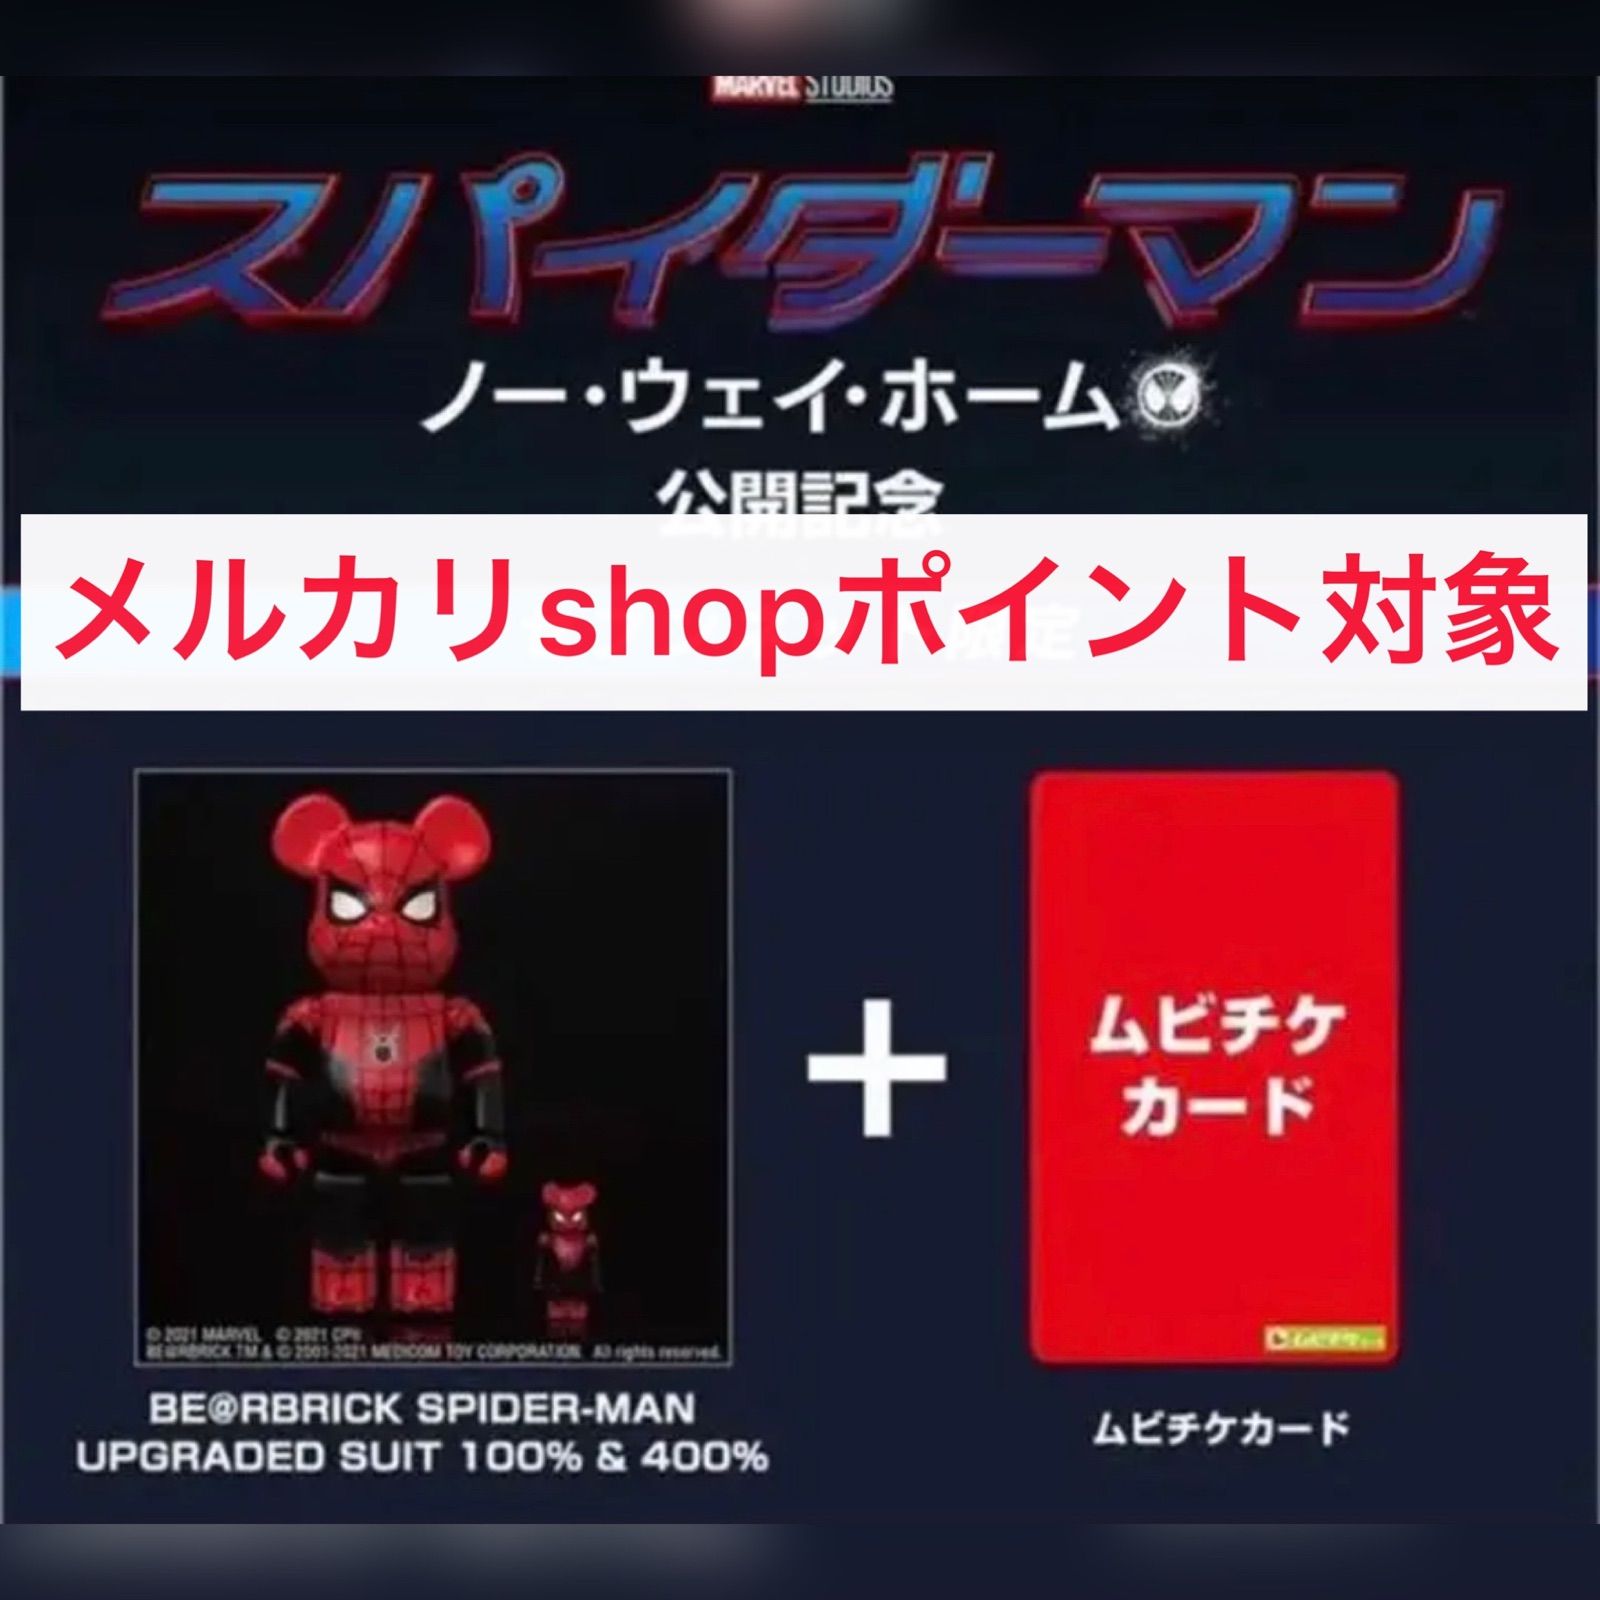 BE@RBRICK SPIDER-MAN UPGRADED SUIT ムビチケ付